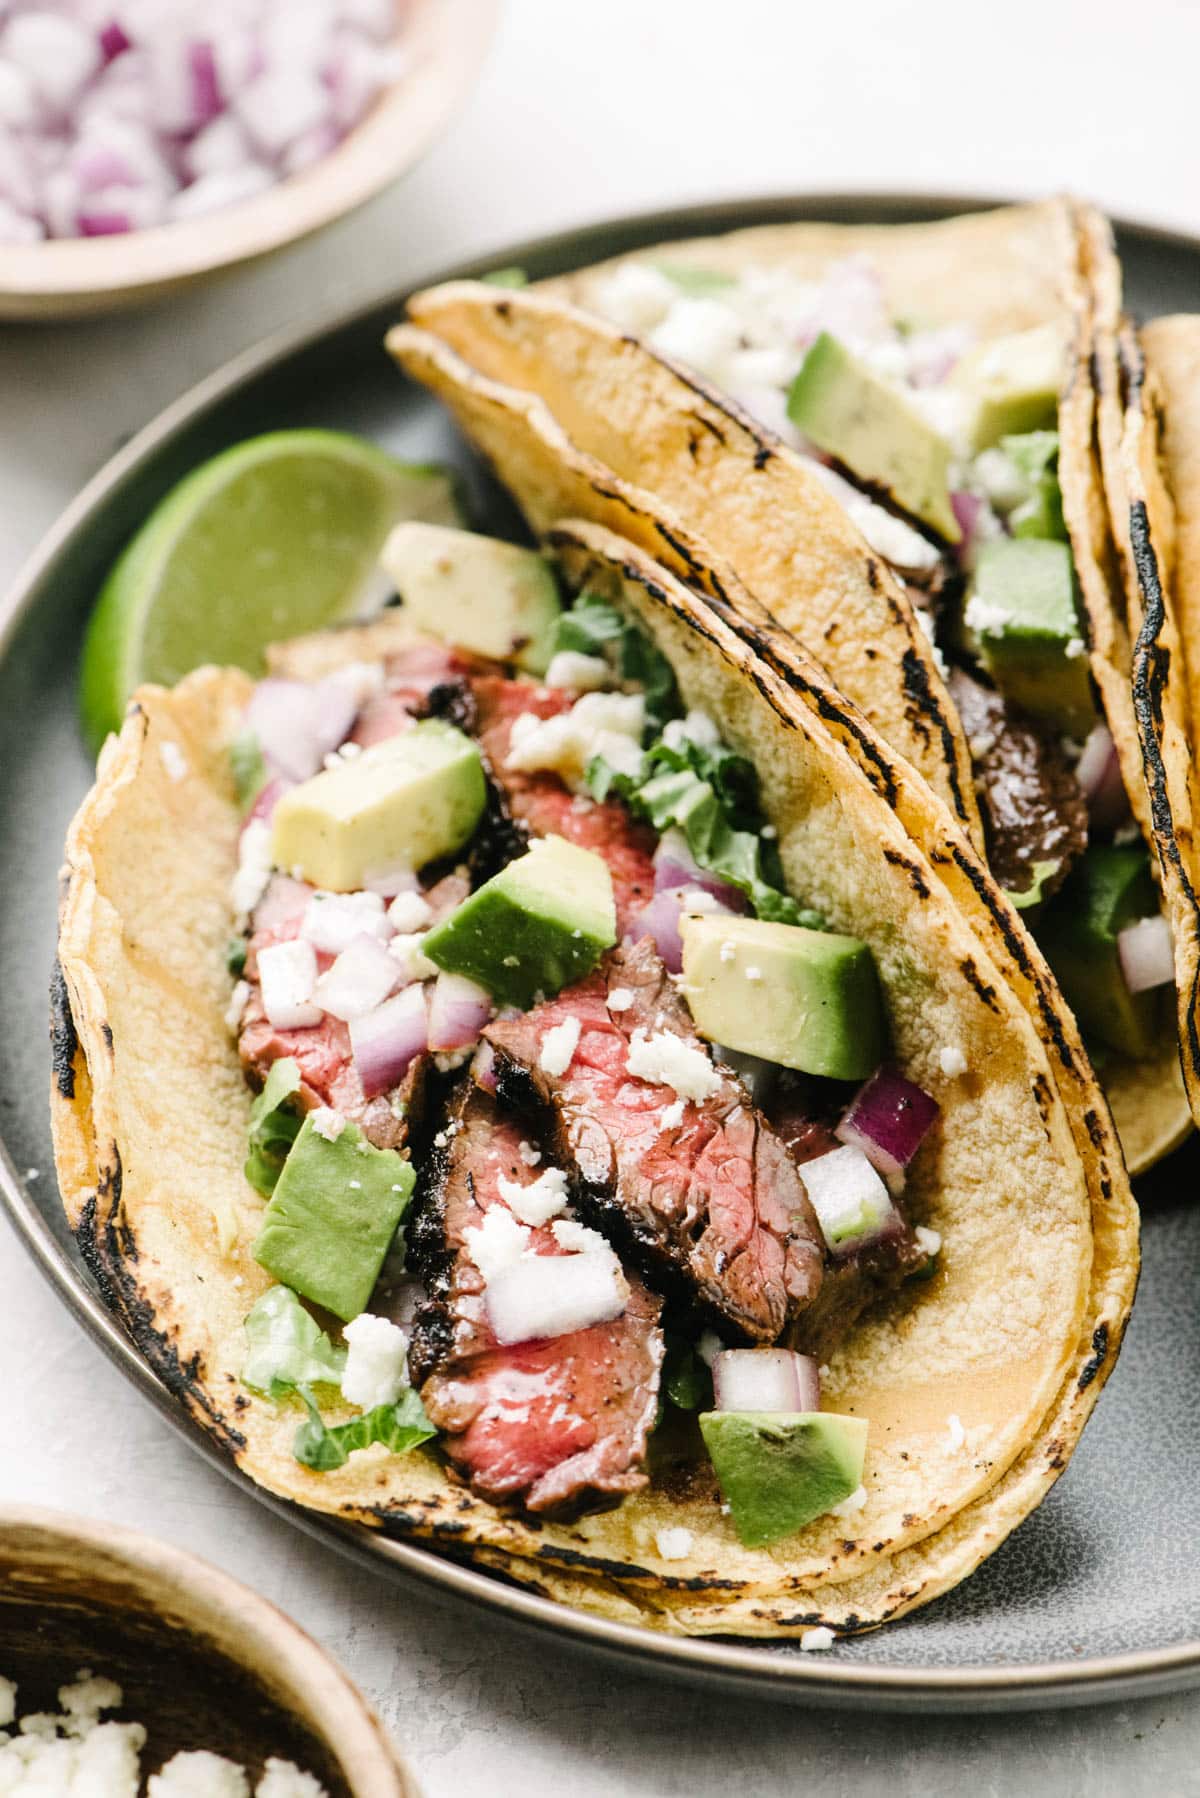 Side view, a close-up view of a steak taco in a corn tortilla shell with grilled skirt steak, avocado, red onion, and crumbled queso fresco cheese.